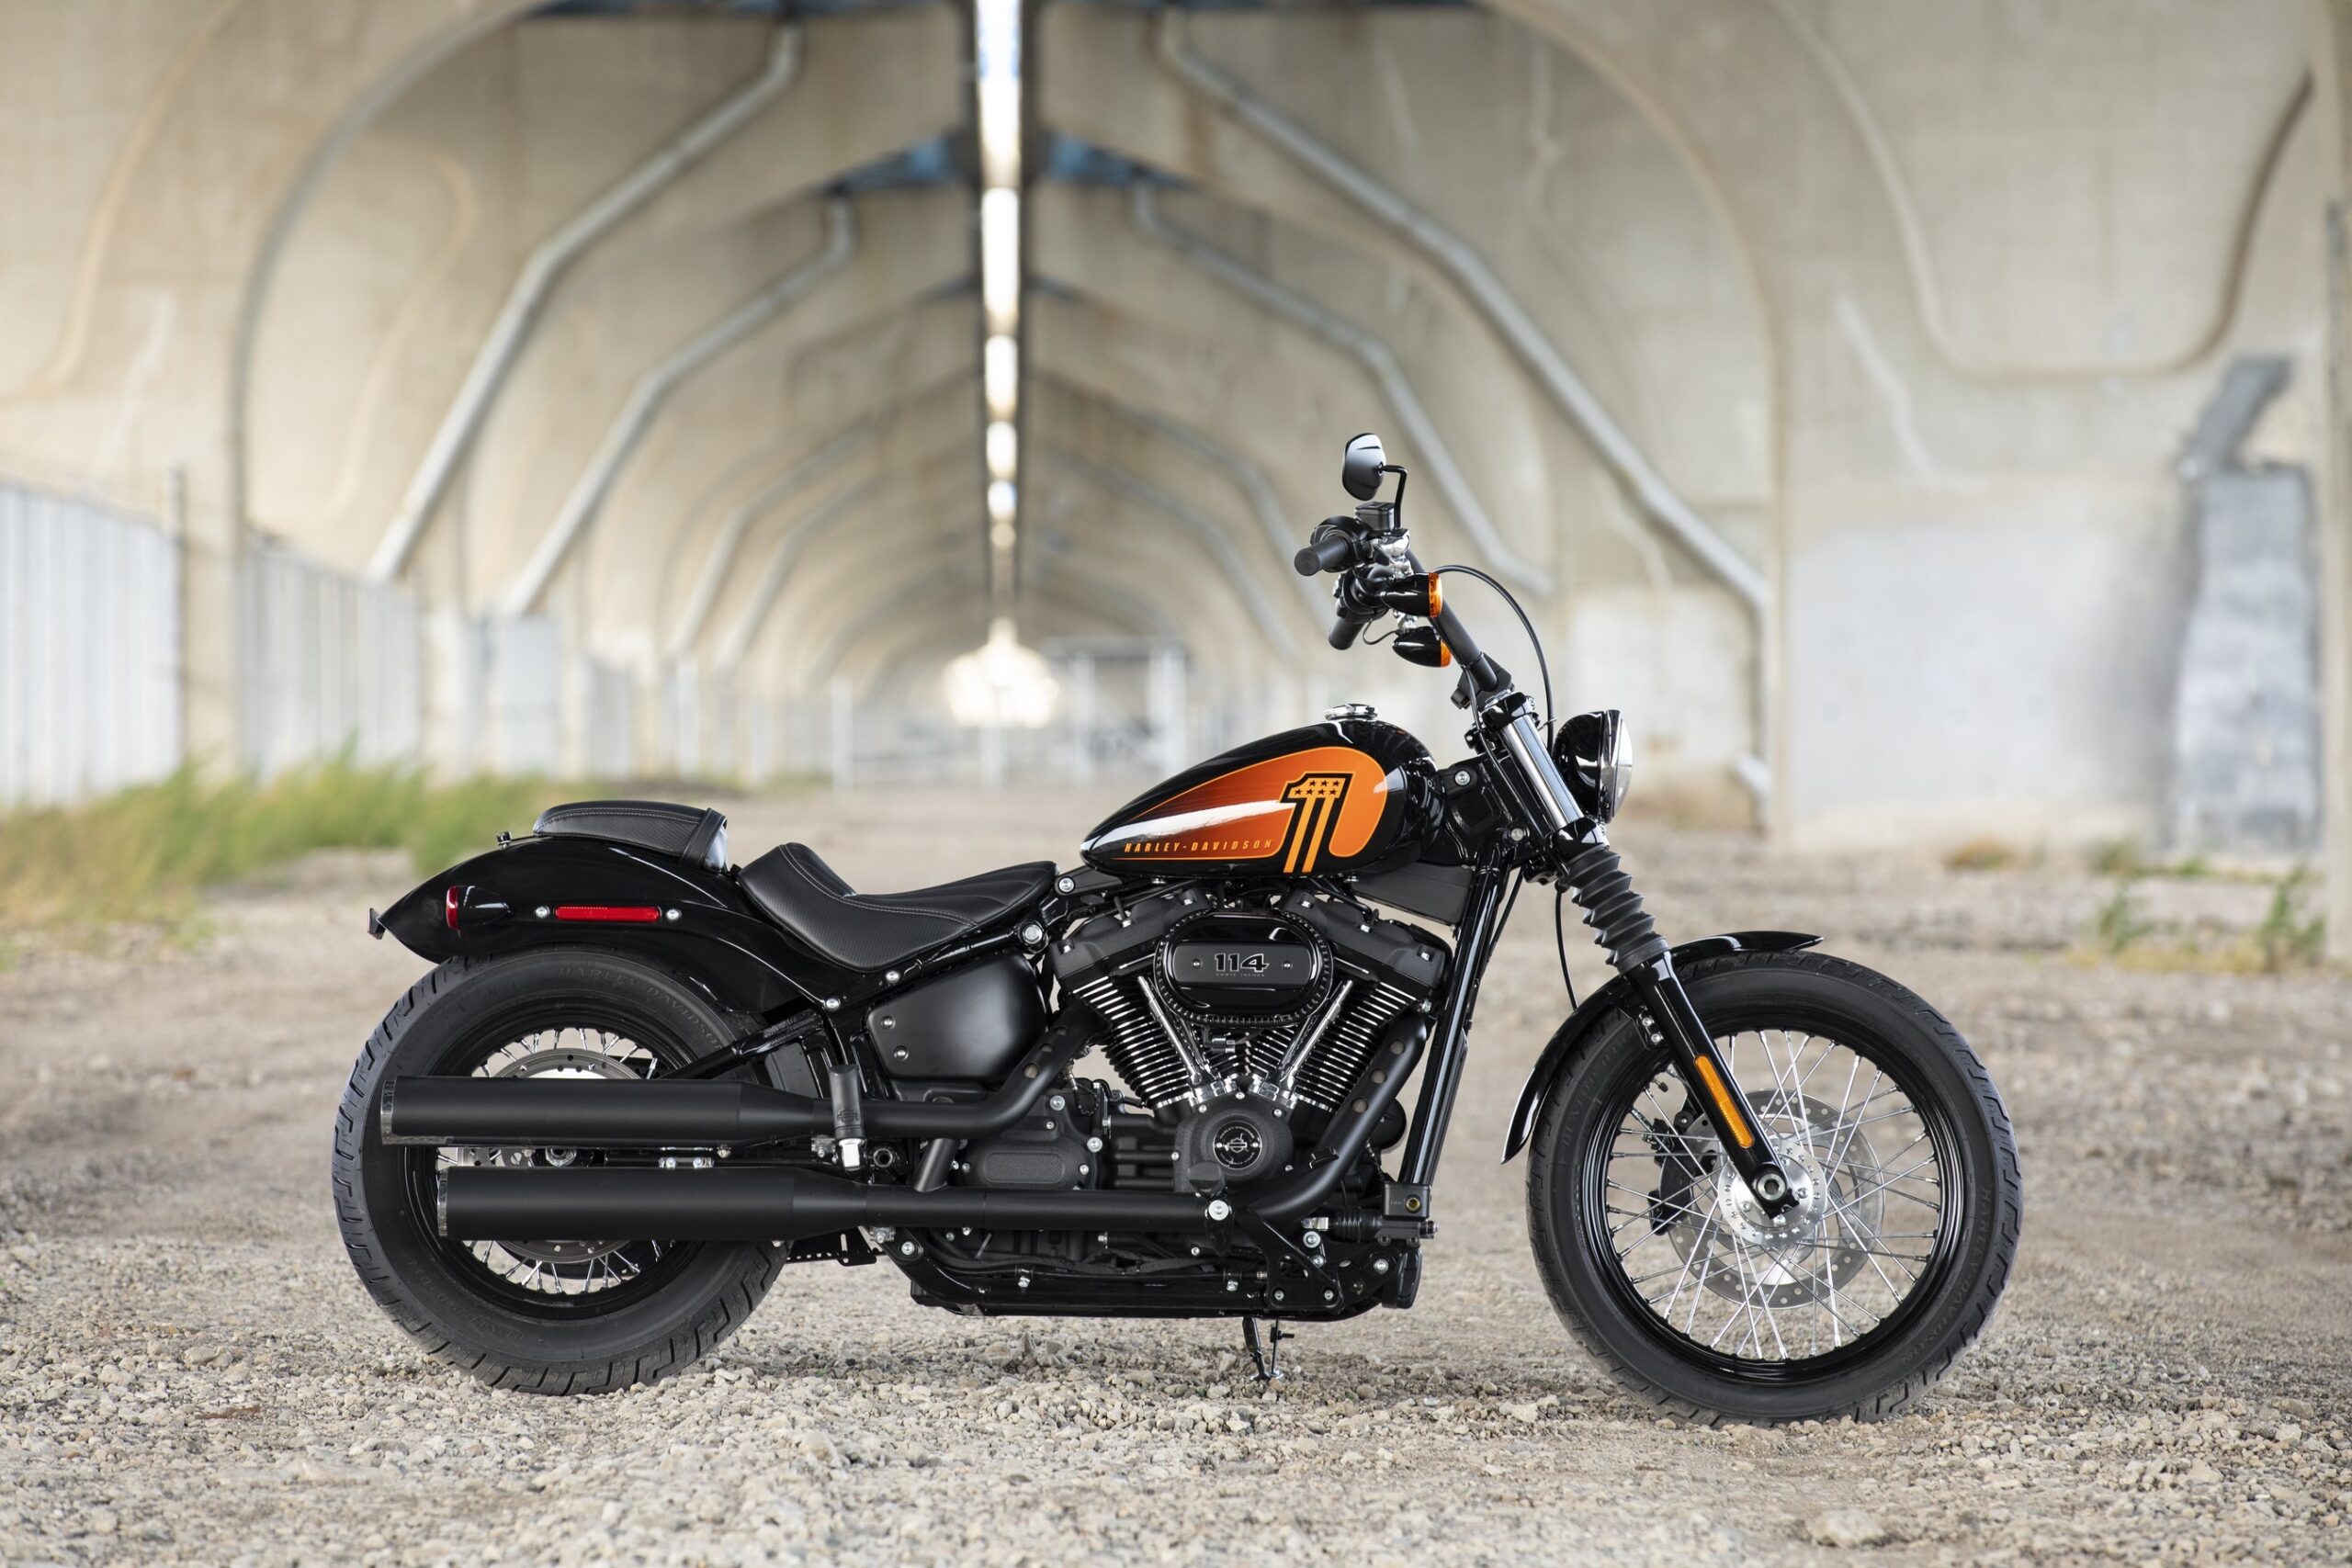 2021 Harley-Davidson Motorcycles Fuel Passion For Adventure & Freedom